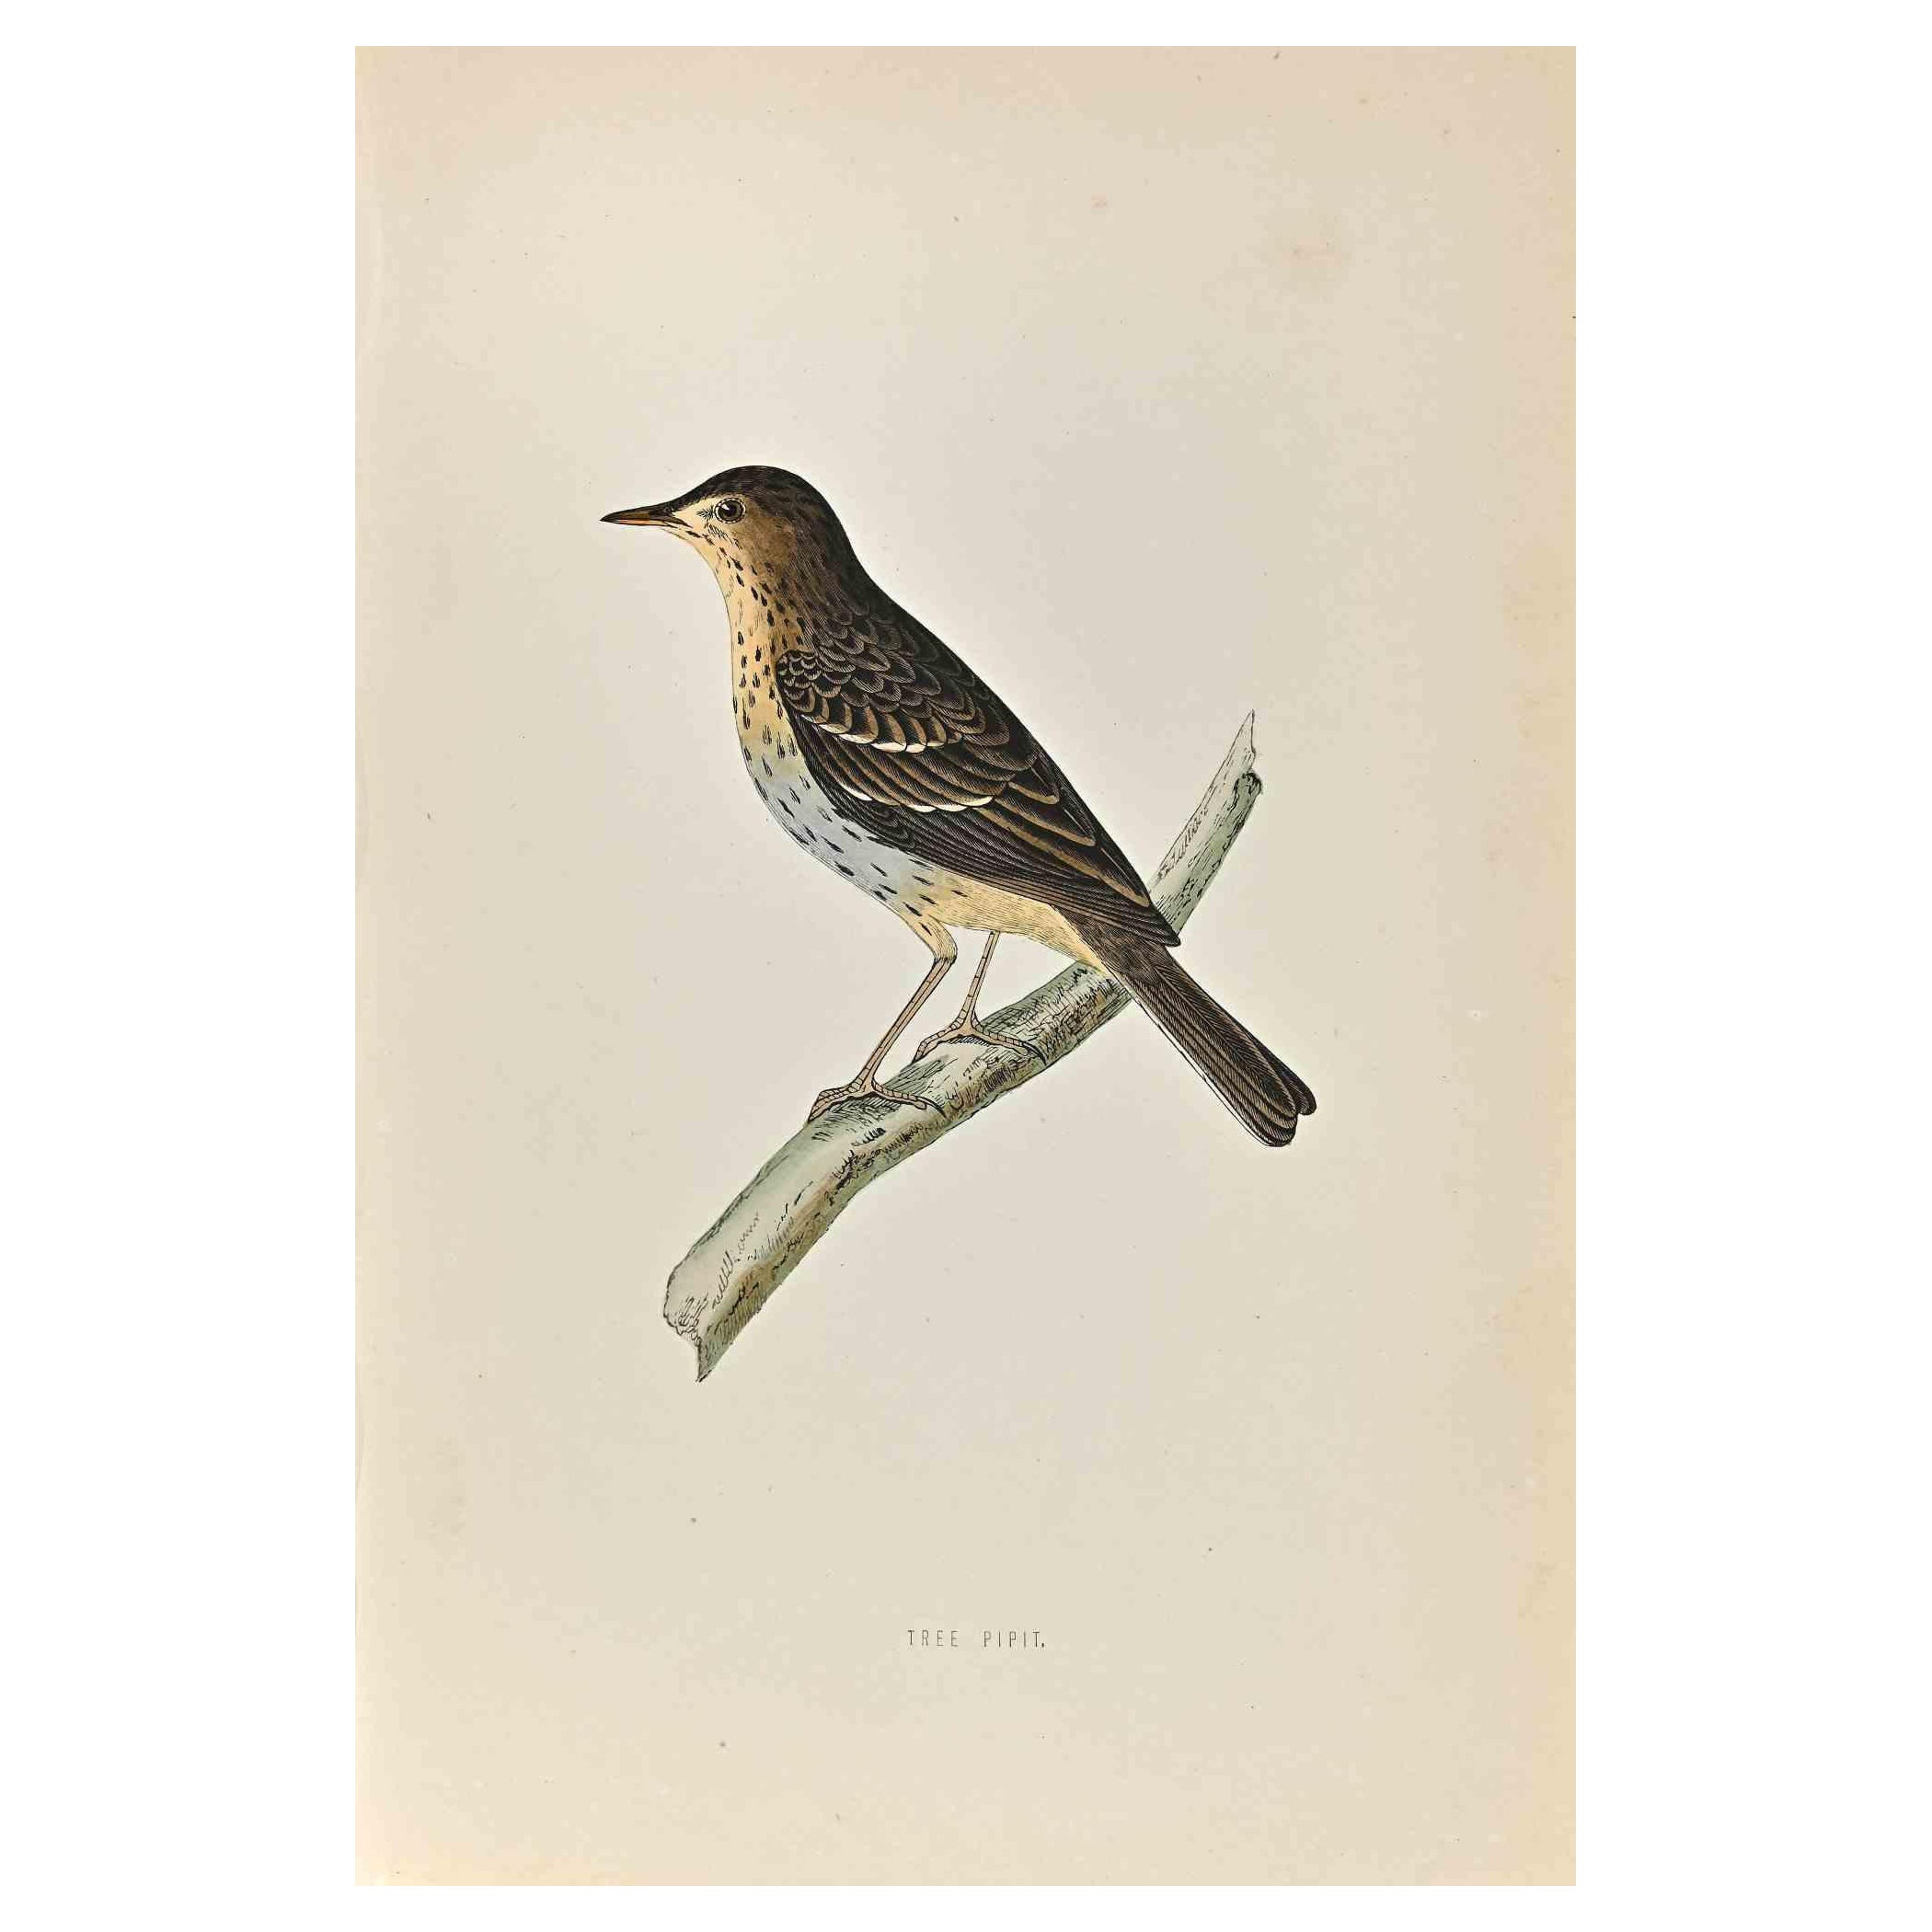 Tree Pipit is a modern artwork realized in 1870 by the British artist Alexander Francis Lydon (1836-1917) . 

Woodcut print, hand colored, published by London, Bell & Sons, 1870.  Name of the bird printed in plate. This work is part of a print suite